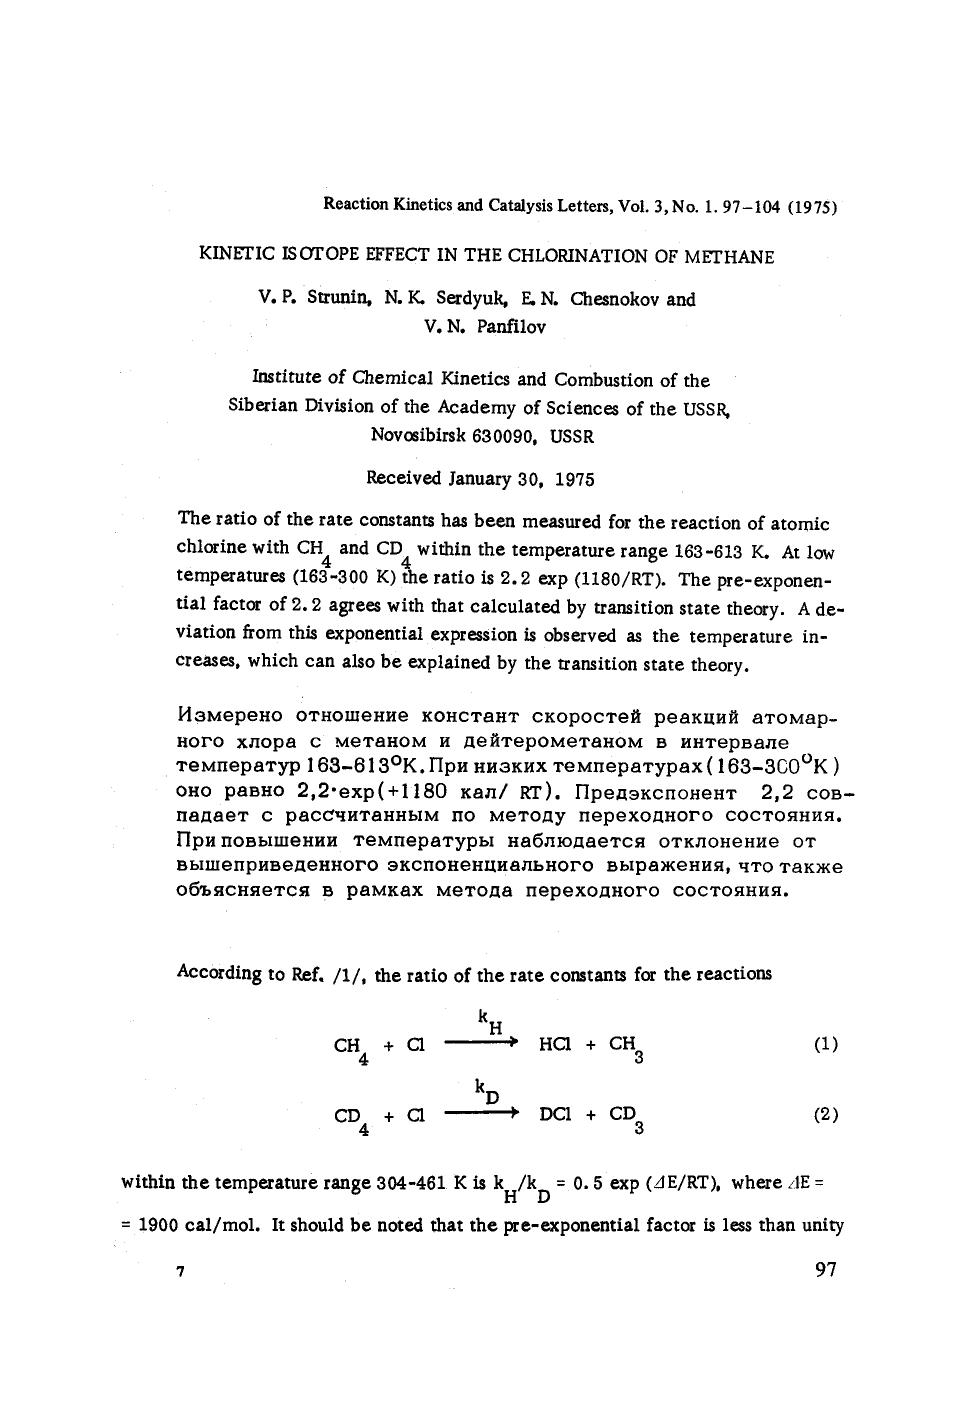 Kinetic isotope effect in the chlorination of methane by Unknown